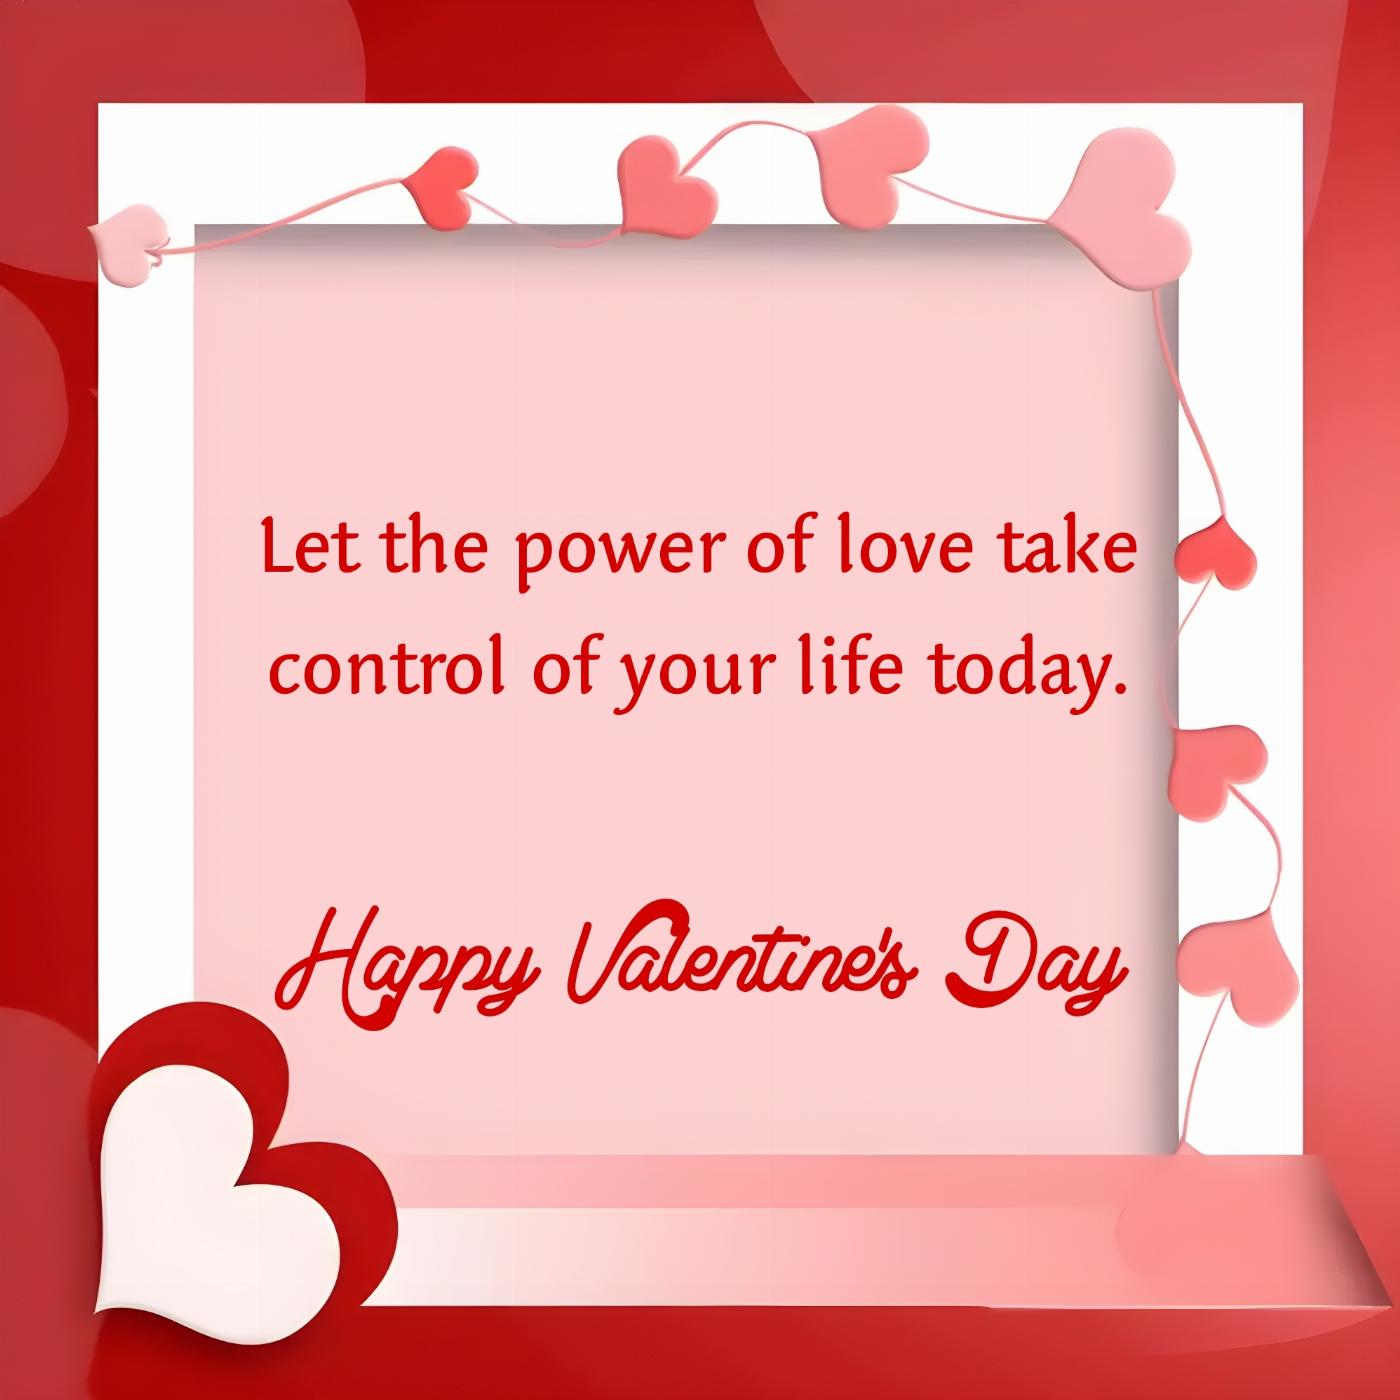 Let the power of love take control of your life today